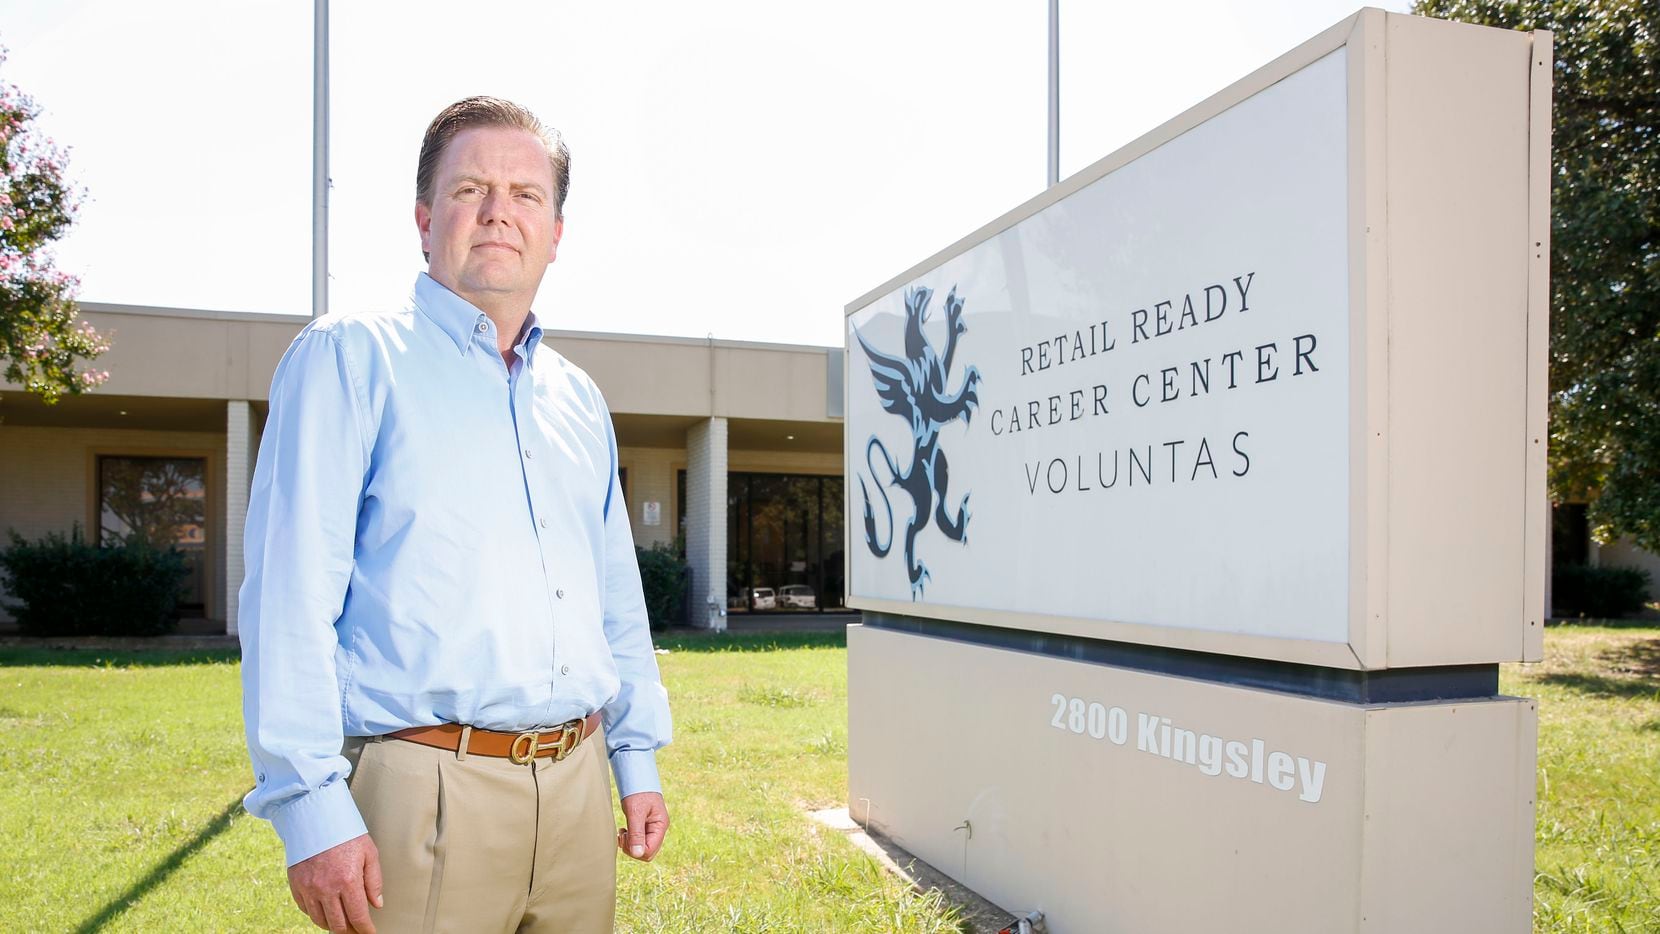 CEO and Founder Jon Davis of the Retail Ready Career Center stands outside the building that...